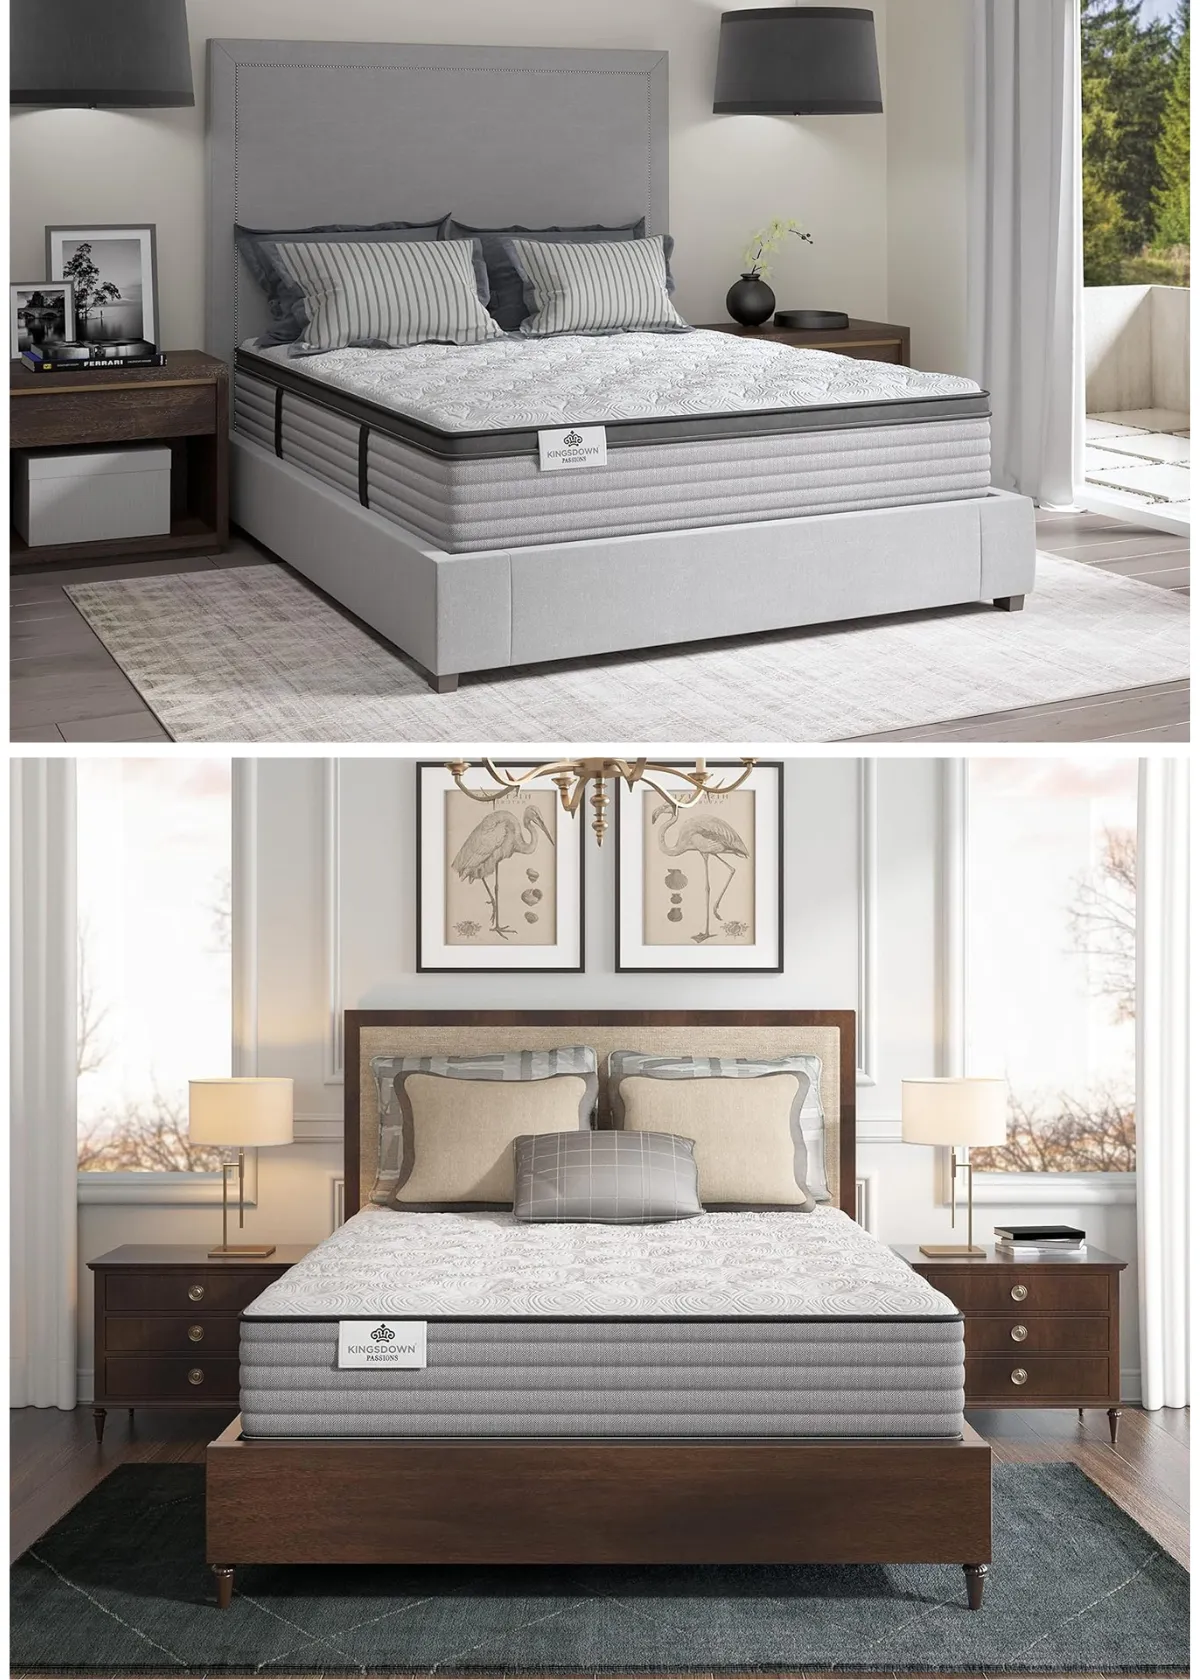 "Is the Kingsdown Mattress the Best Luxurious Pick For a Couple?"